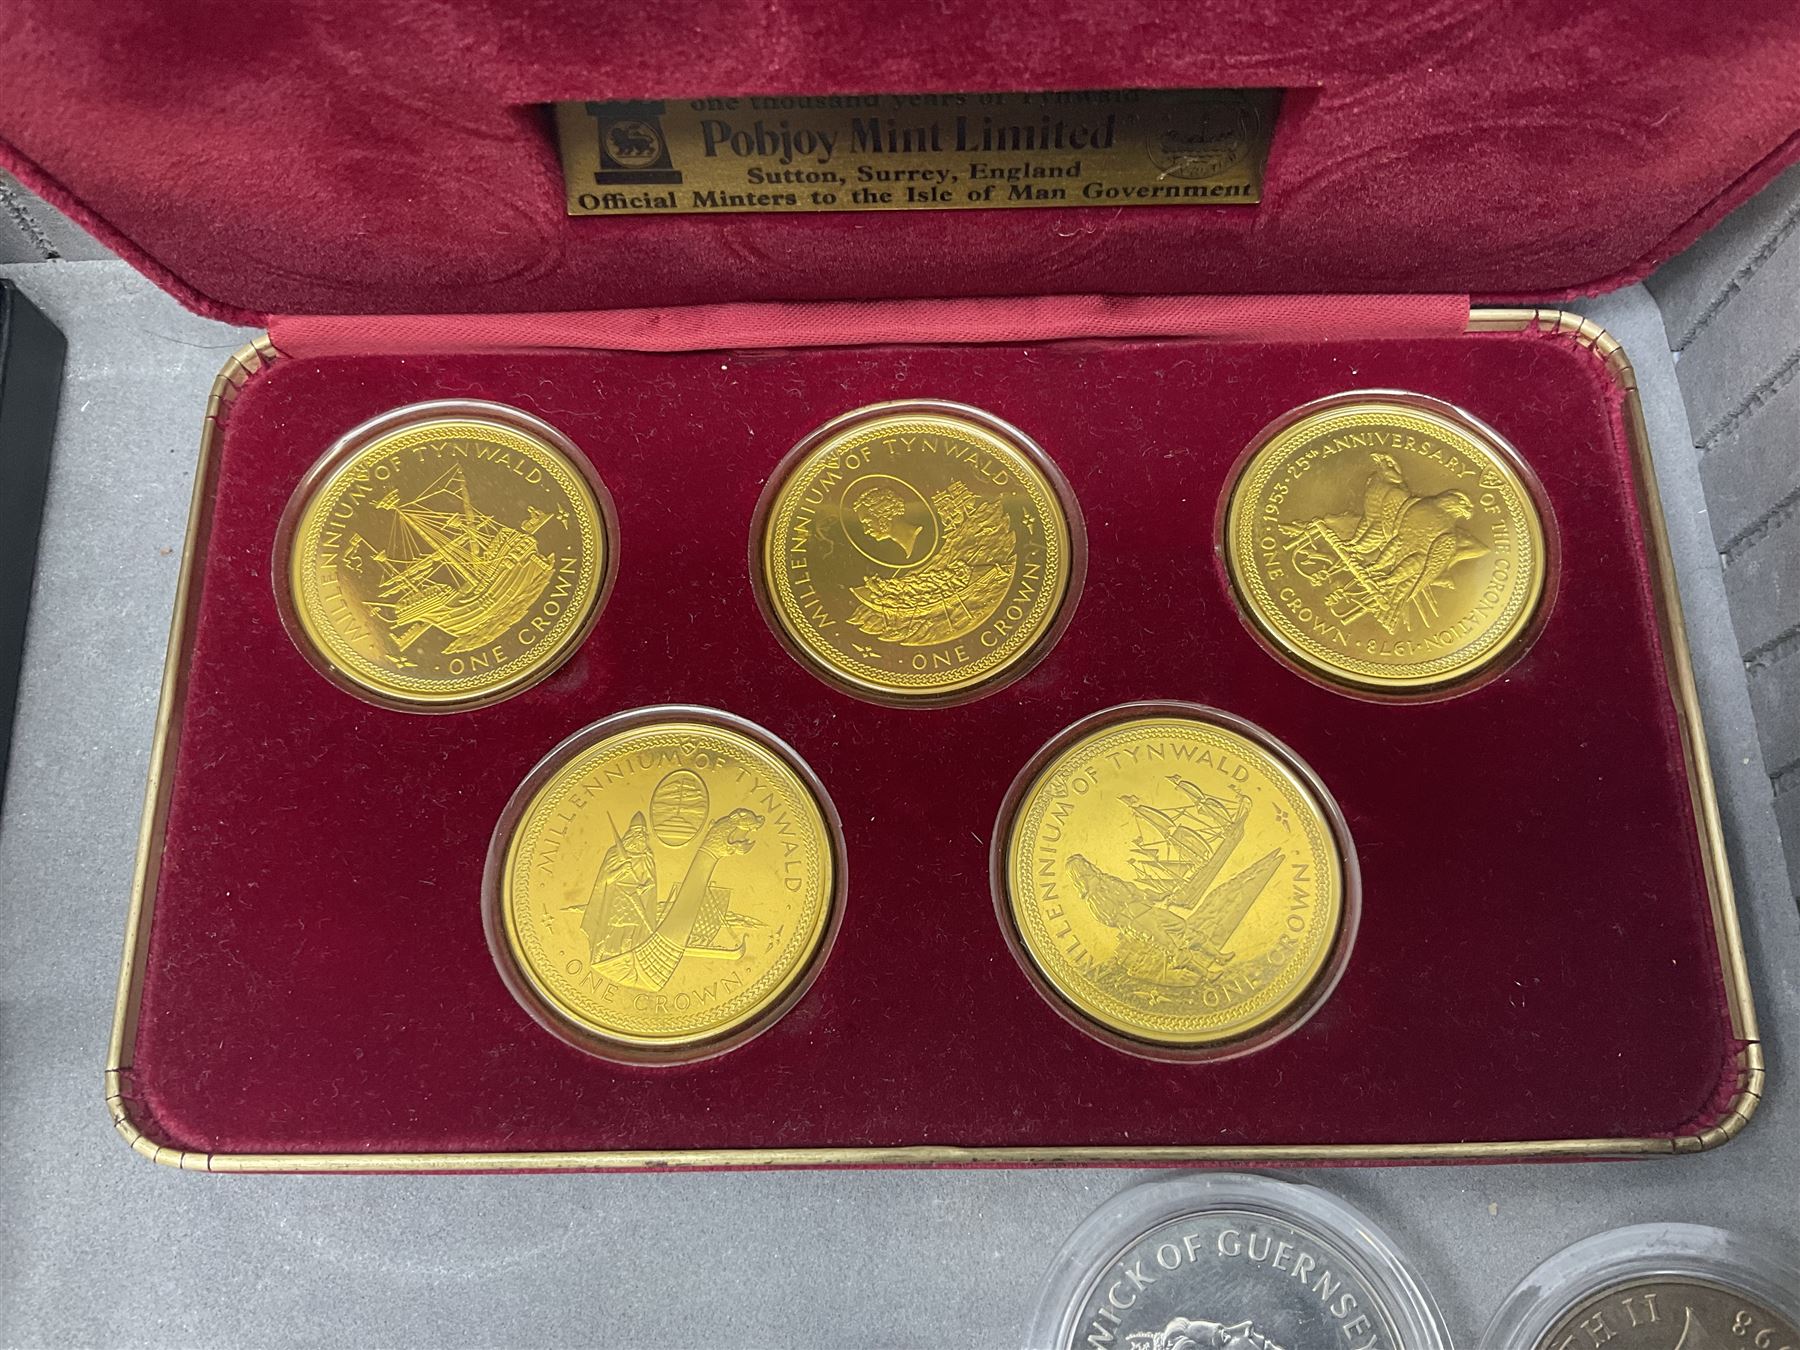 The Royal Mint United Kingdom 1977 silver proof two coin set - Image 5 of 10